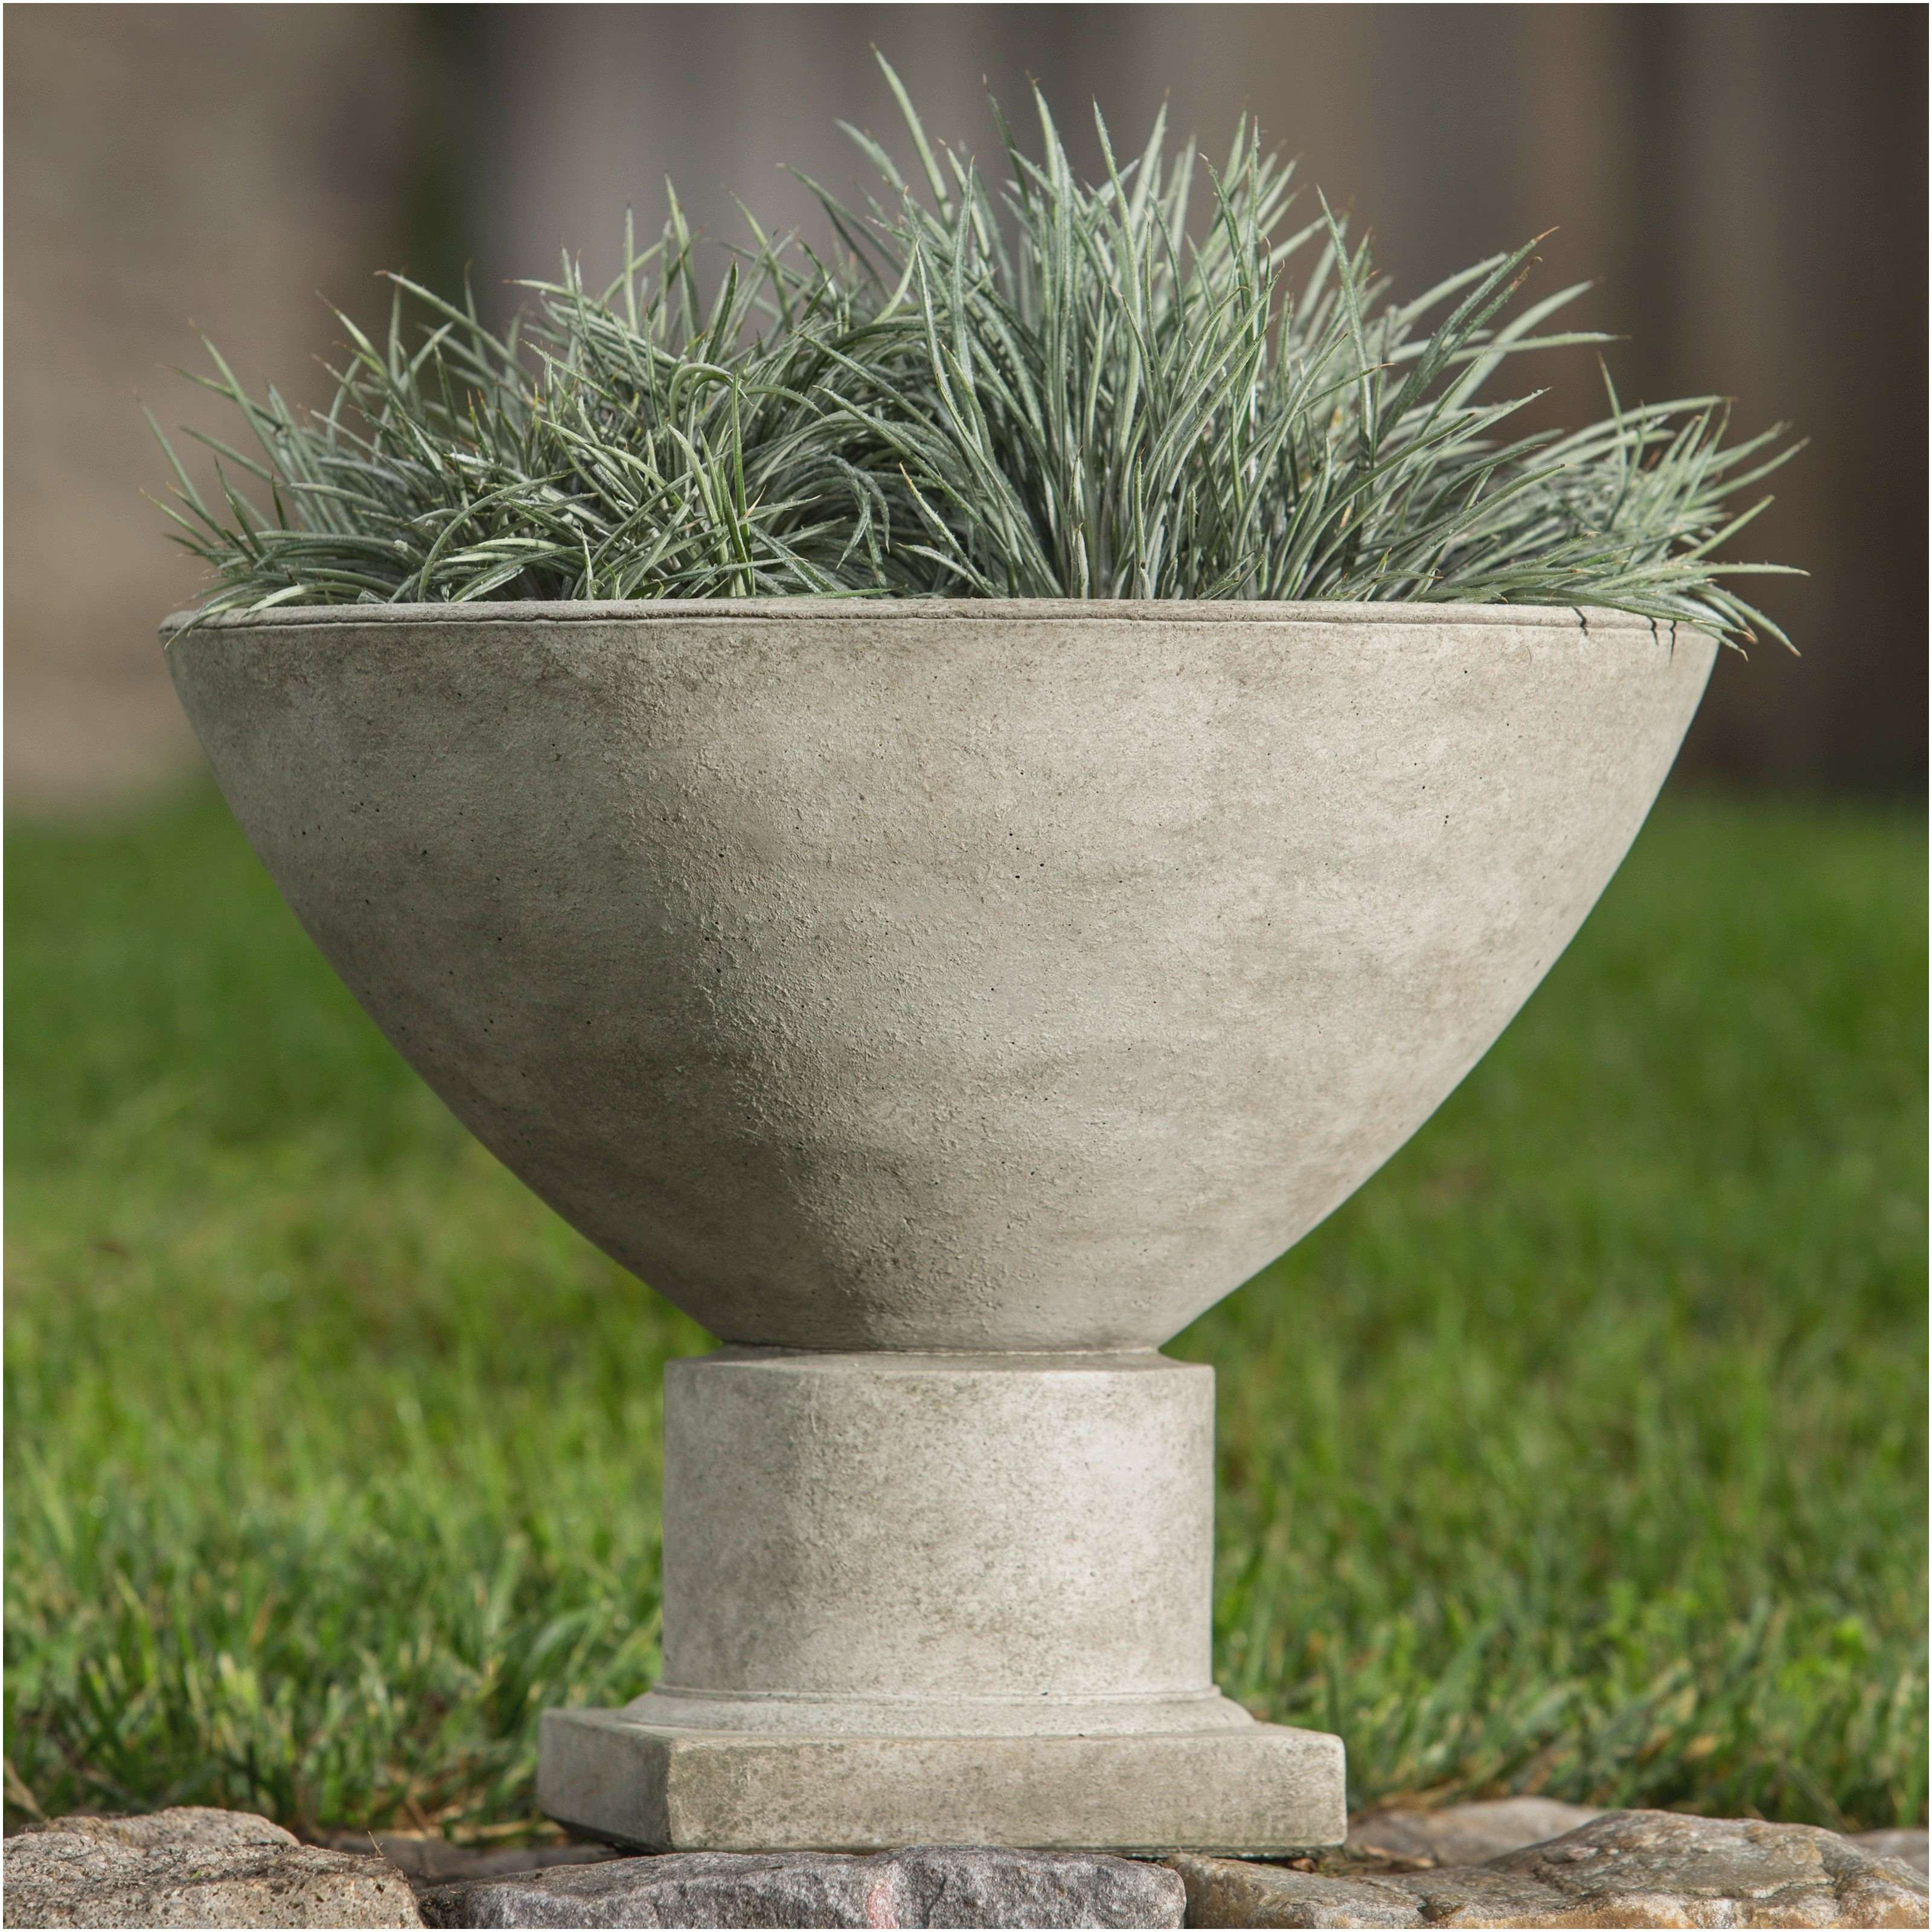 10 Elegant Large Outdoor Vases wholesale 2024 free download large outdoor vases wholesale of cast stone garden bench the right choice diy furniture projects for pertaining to cast stone garden bench updating your have to have it campania internationa